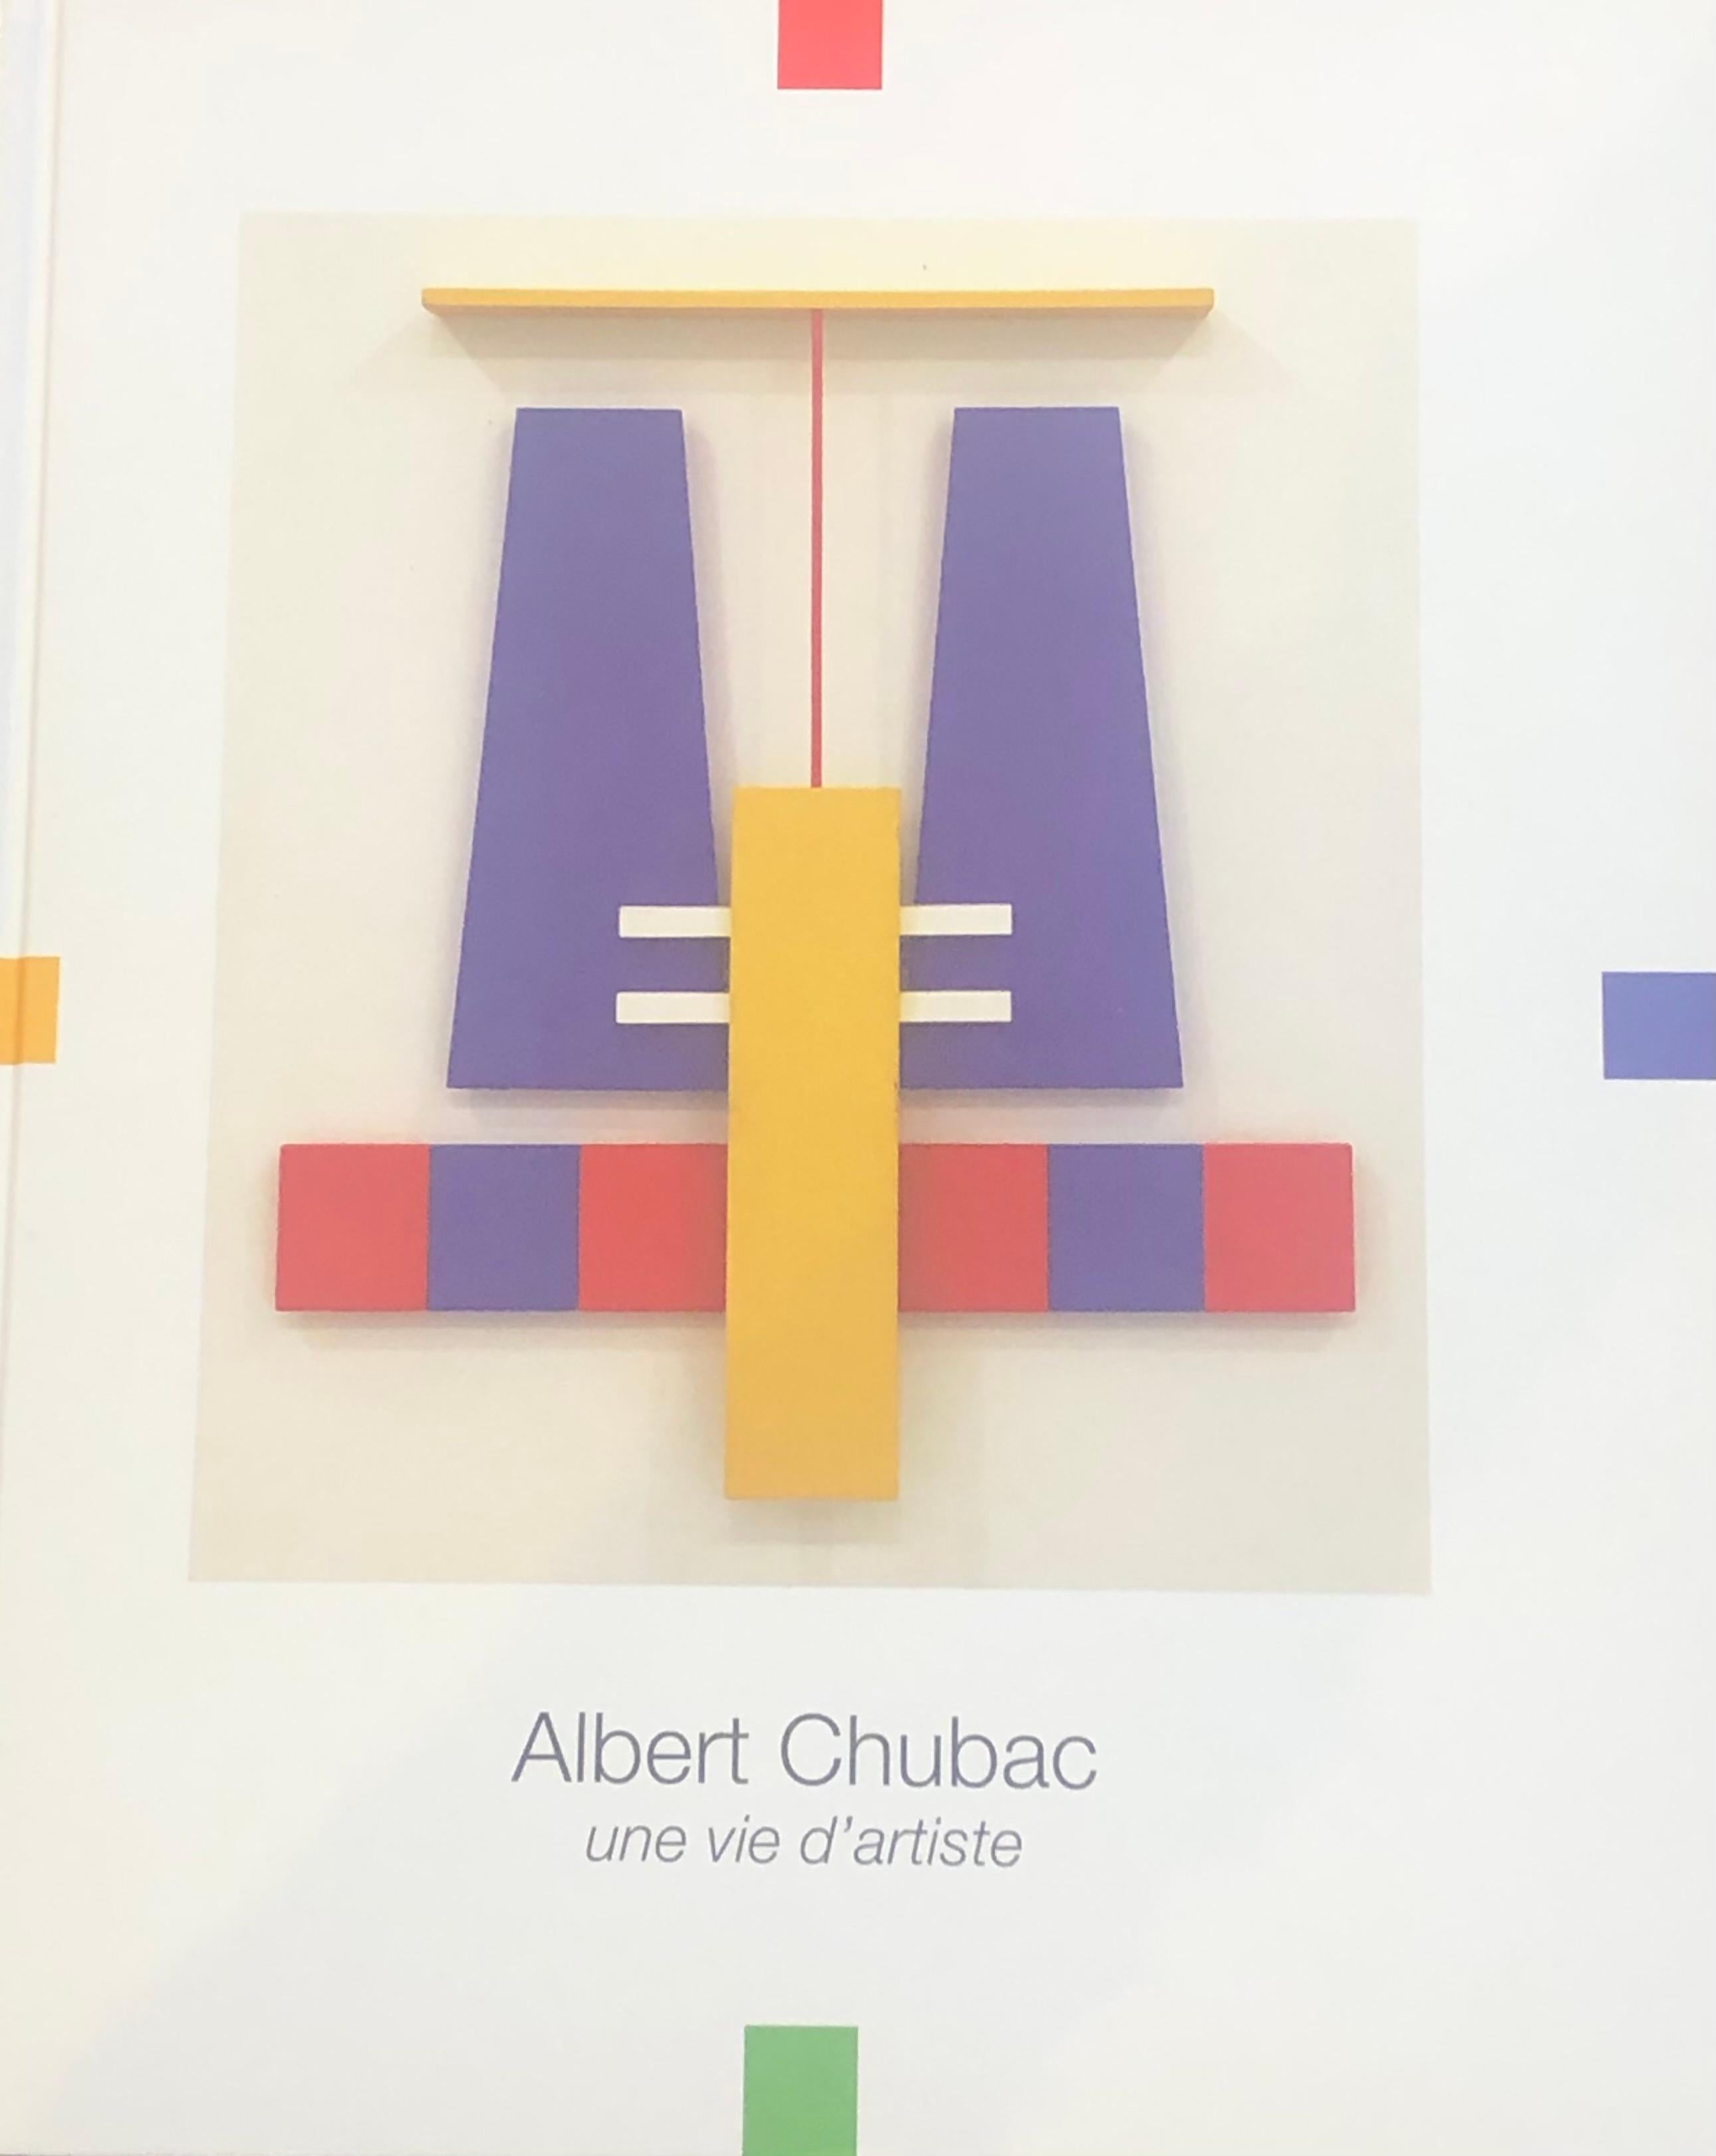 Albert Chubac Painting on Canvas, Airbrush, Iron and Wood, 1964 For Sale 8